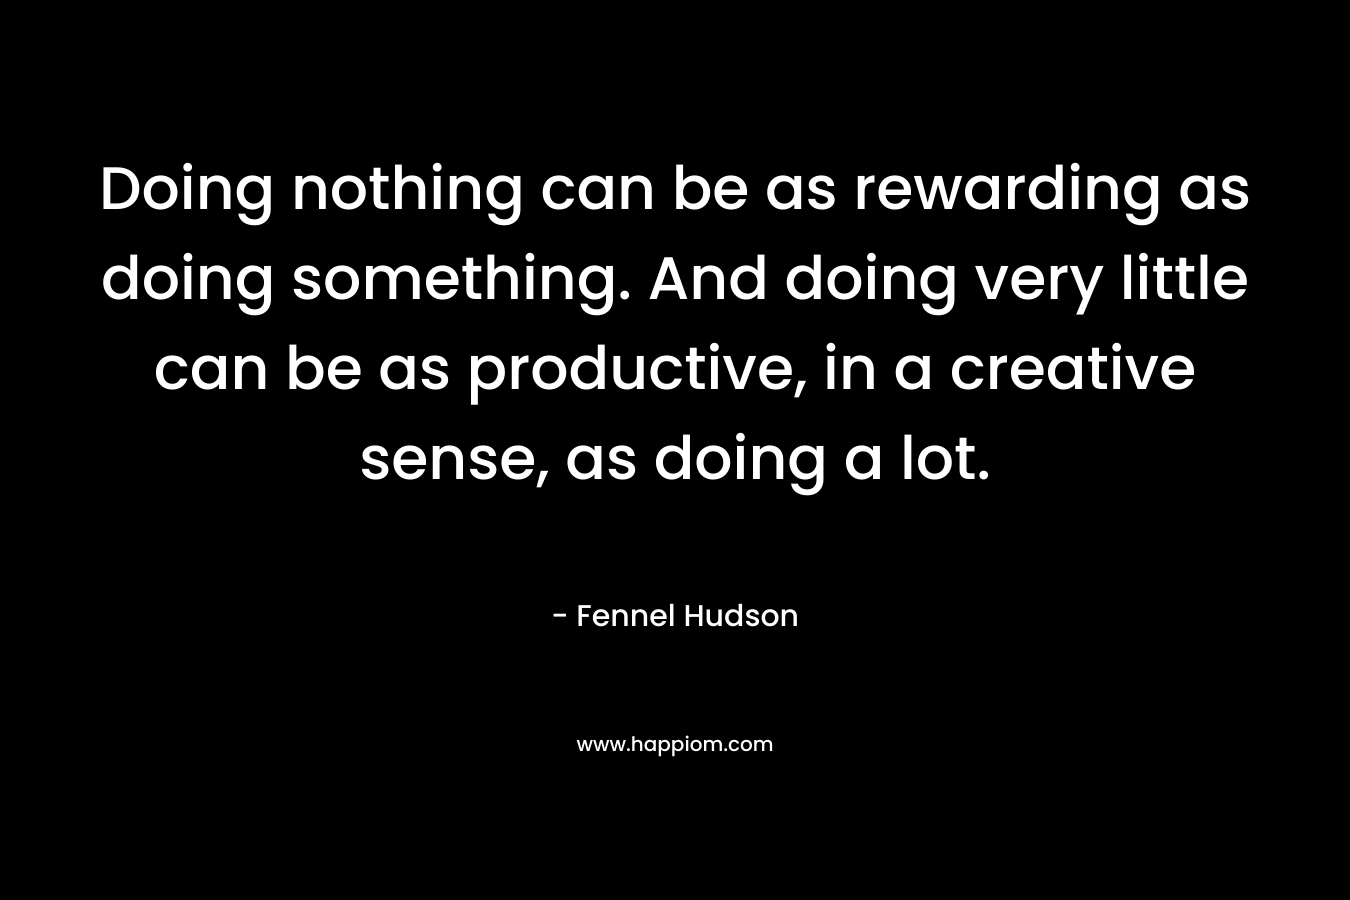 Doing nothing can be as rewarding as doing something. And doing very little can be as productive, in a creative sense, as doing a lot.